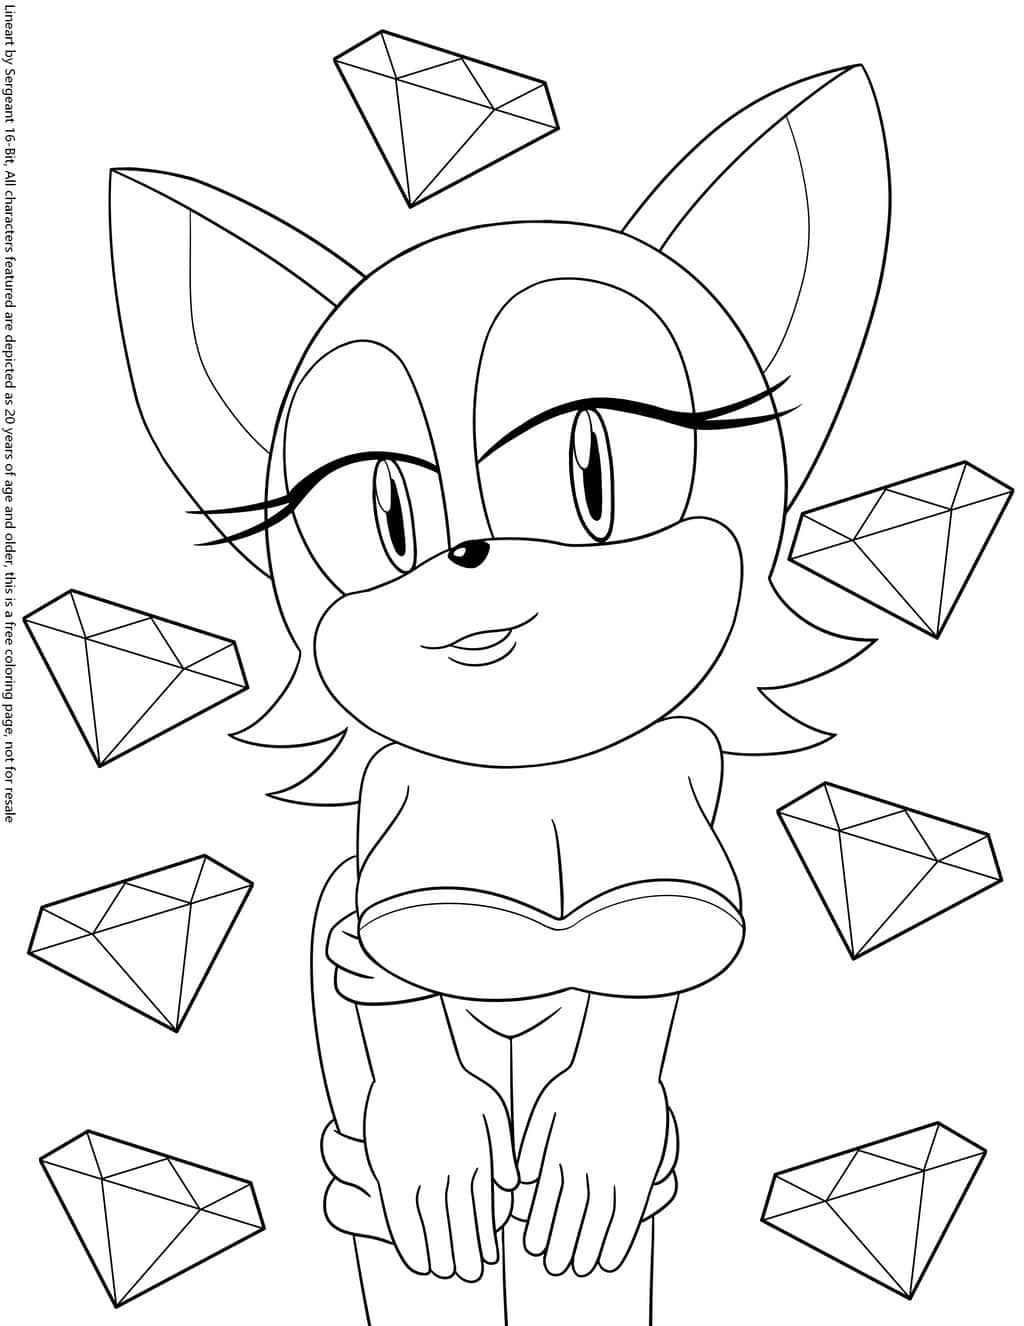 sonic x characters coloring pages